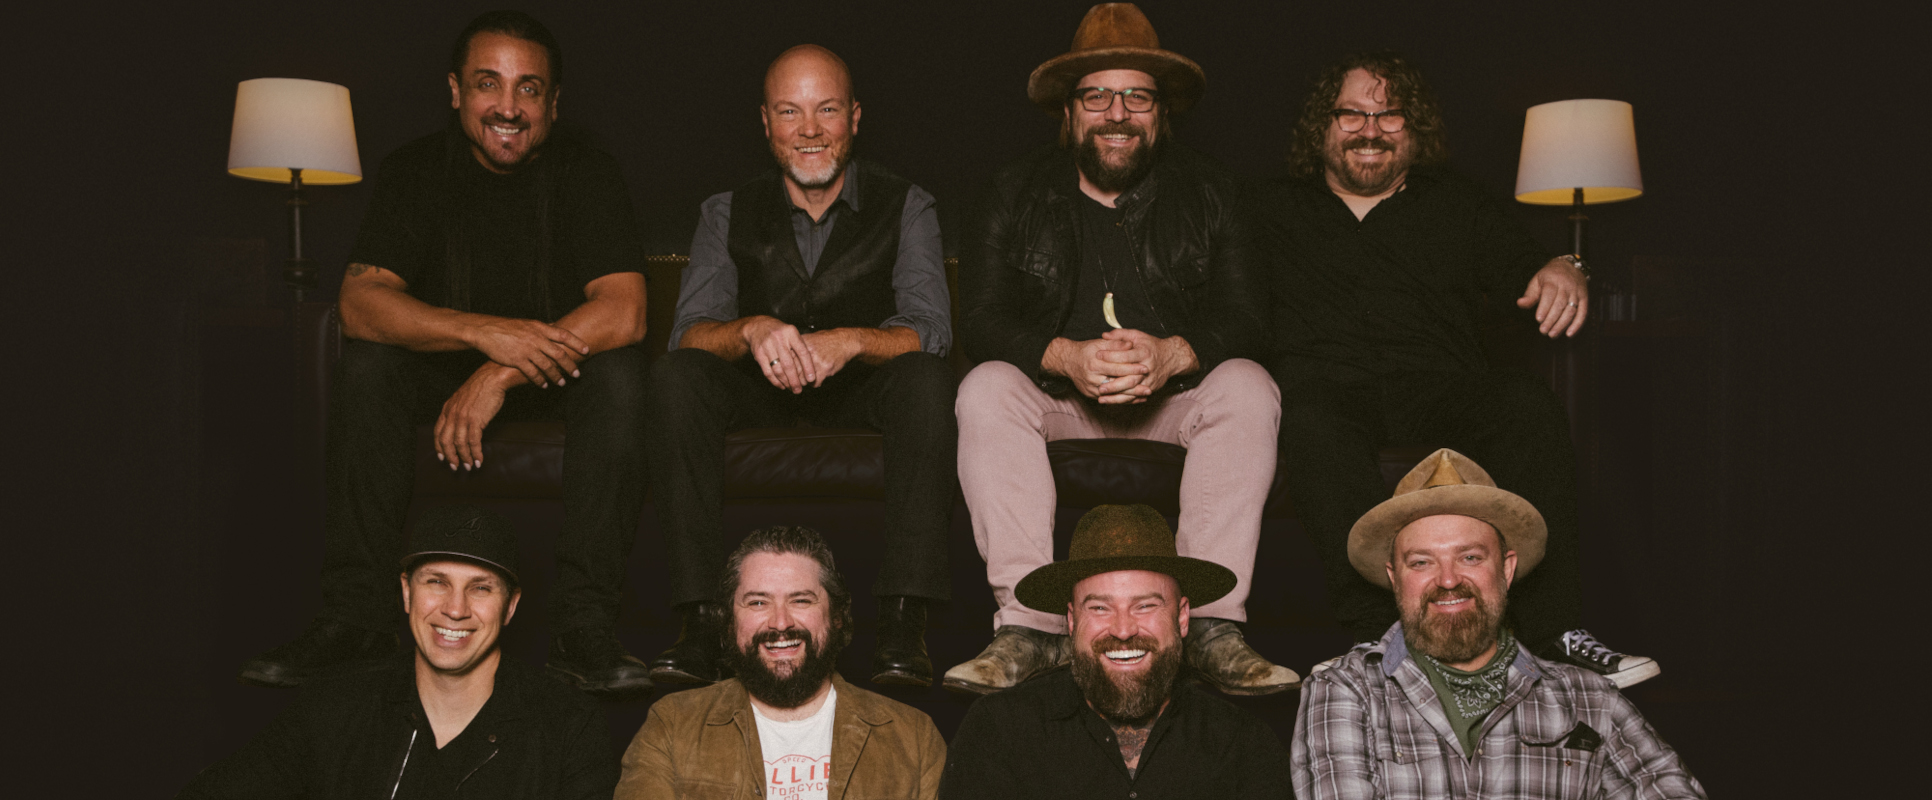 Zac Brown Band Releases New Uplifting Single “Same Boat”